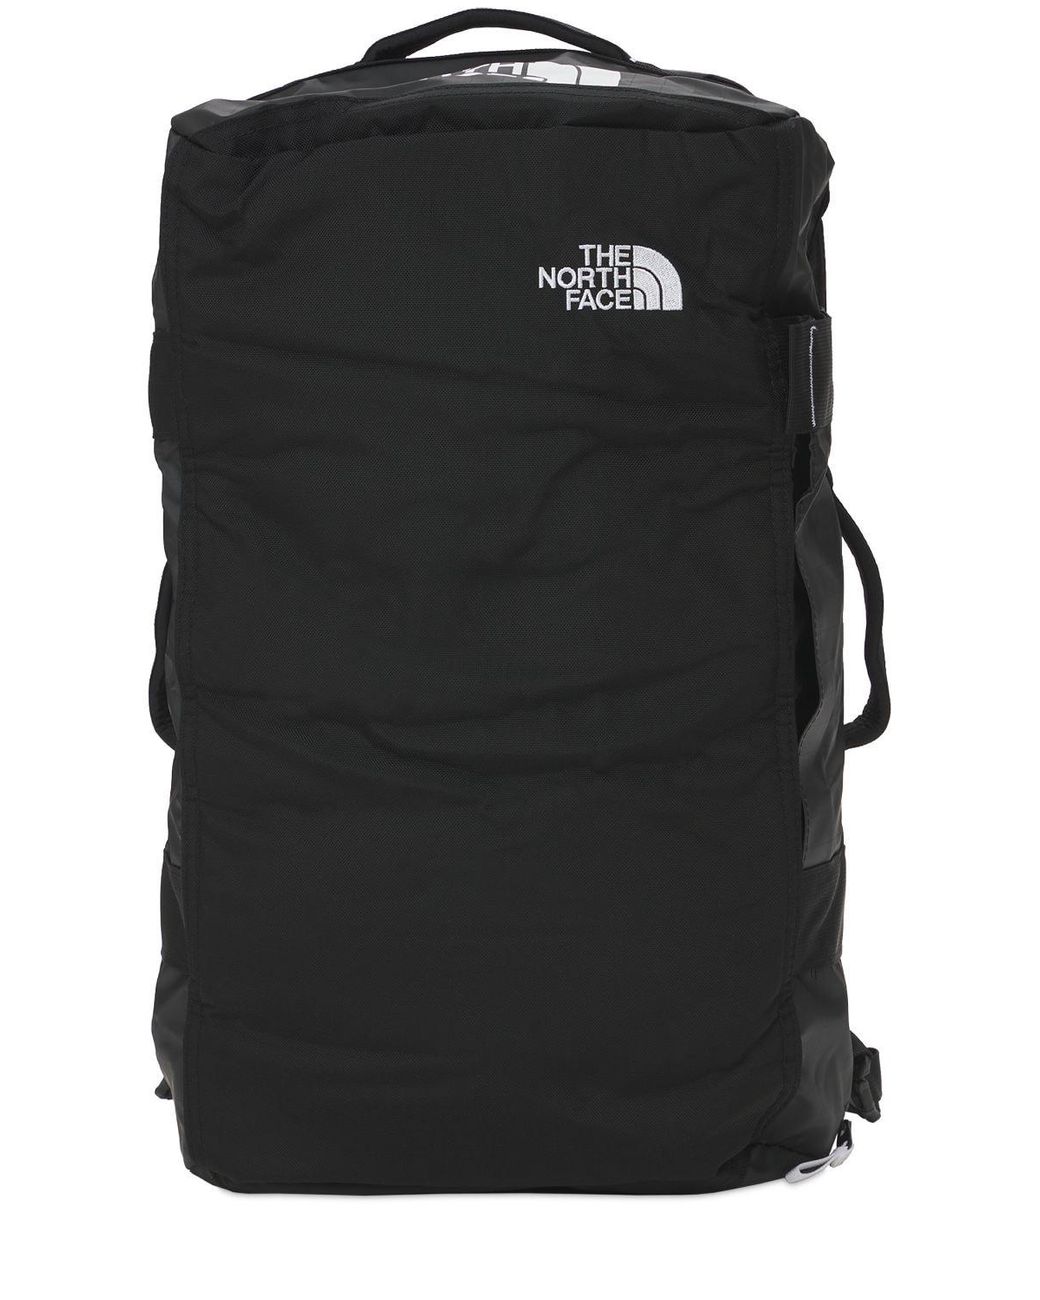 The North Face 32l Base Camp Voyager Duffle Bag in Black/White (Black